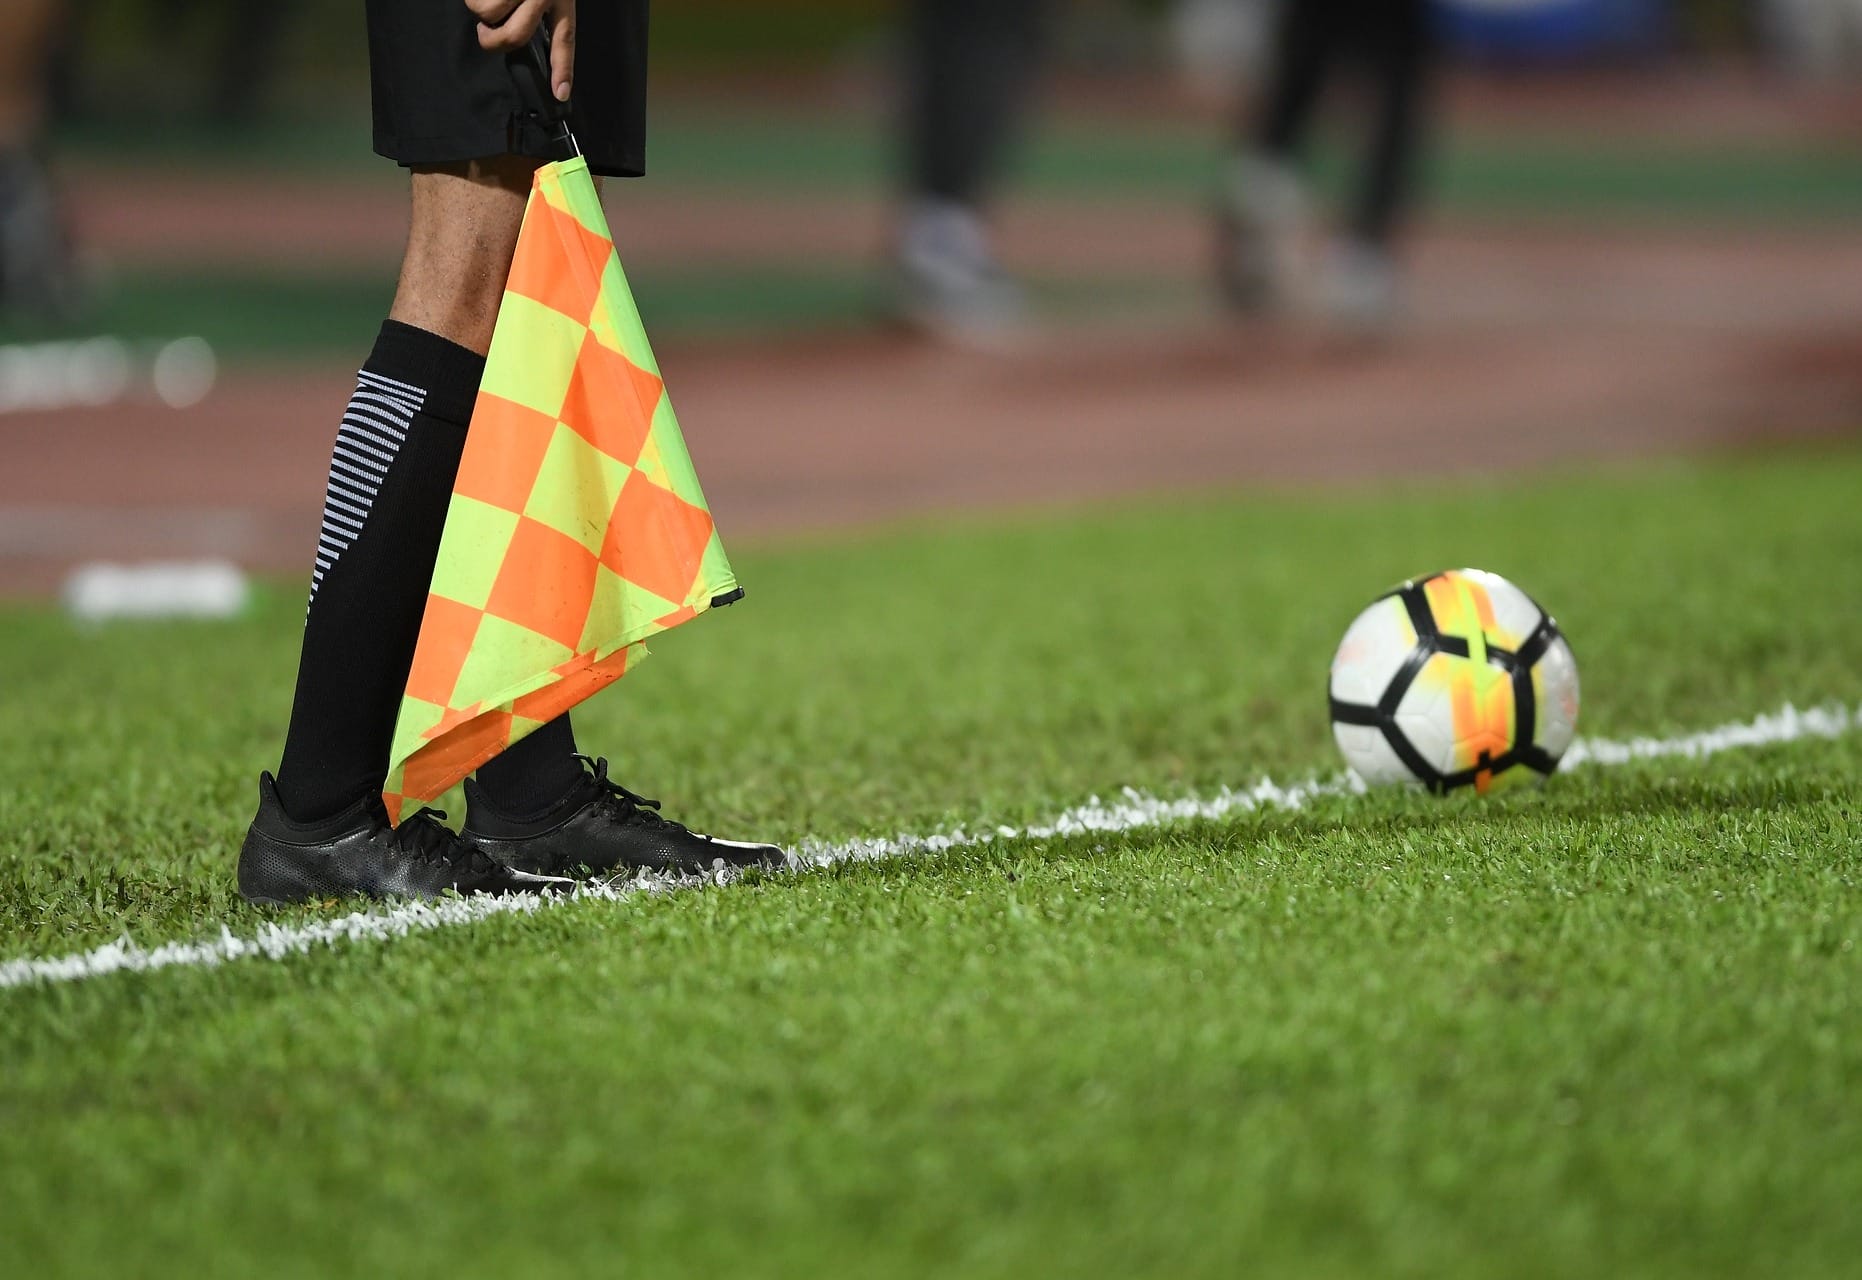 Football referee Picture: Pixabay